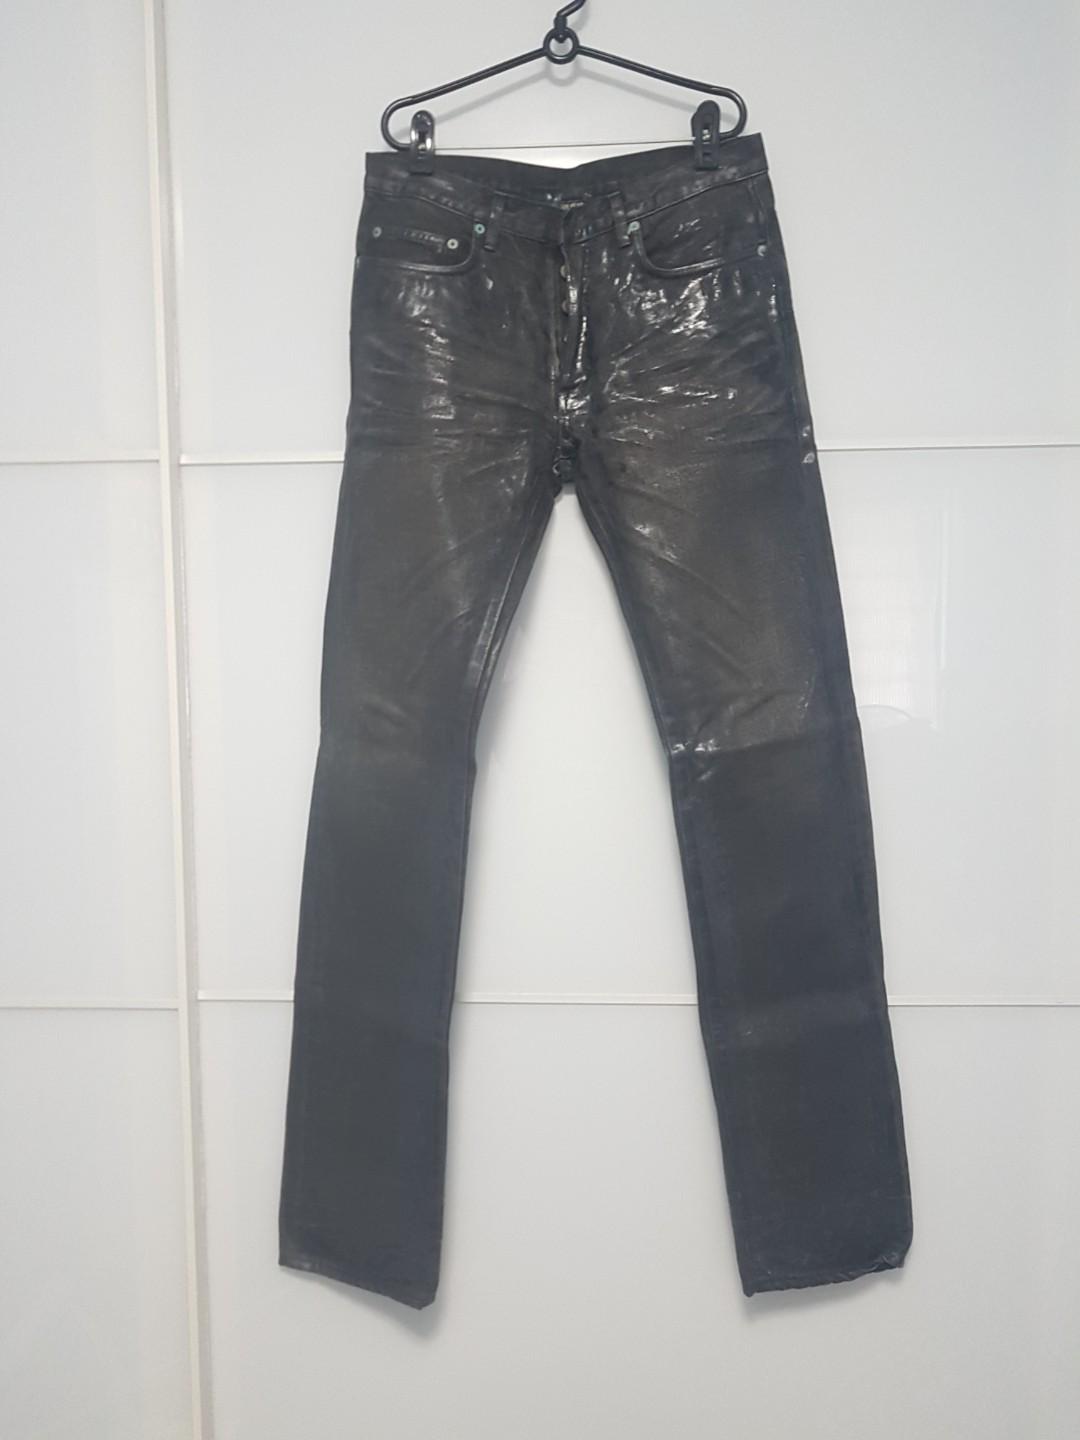 dior waxed jeans